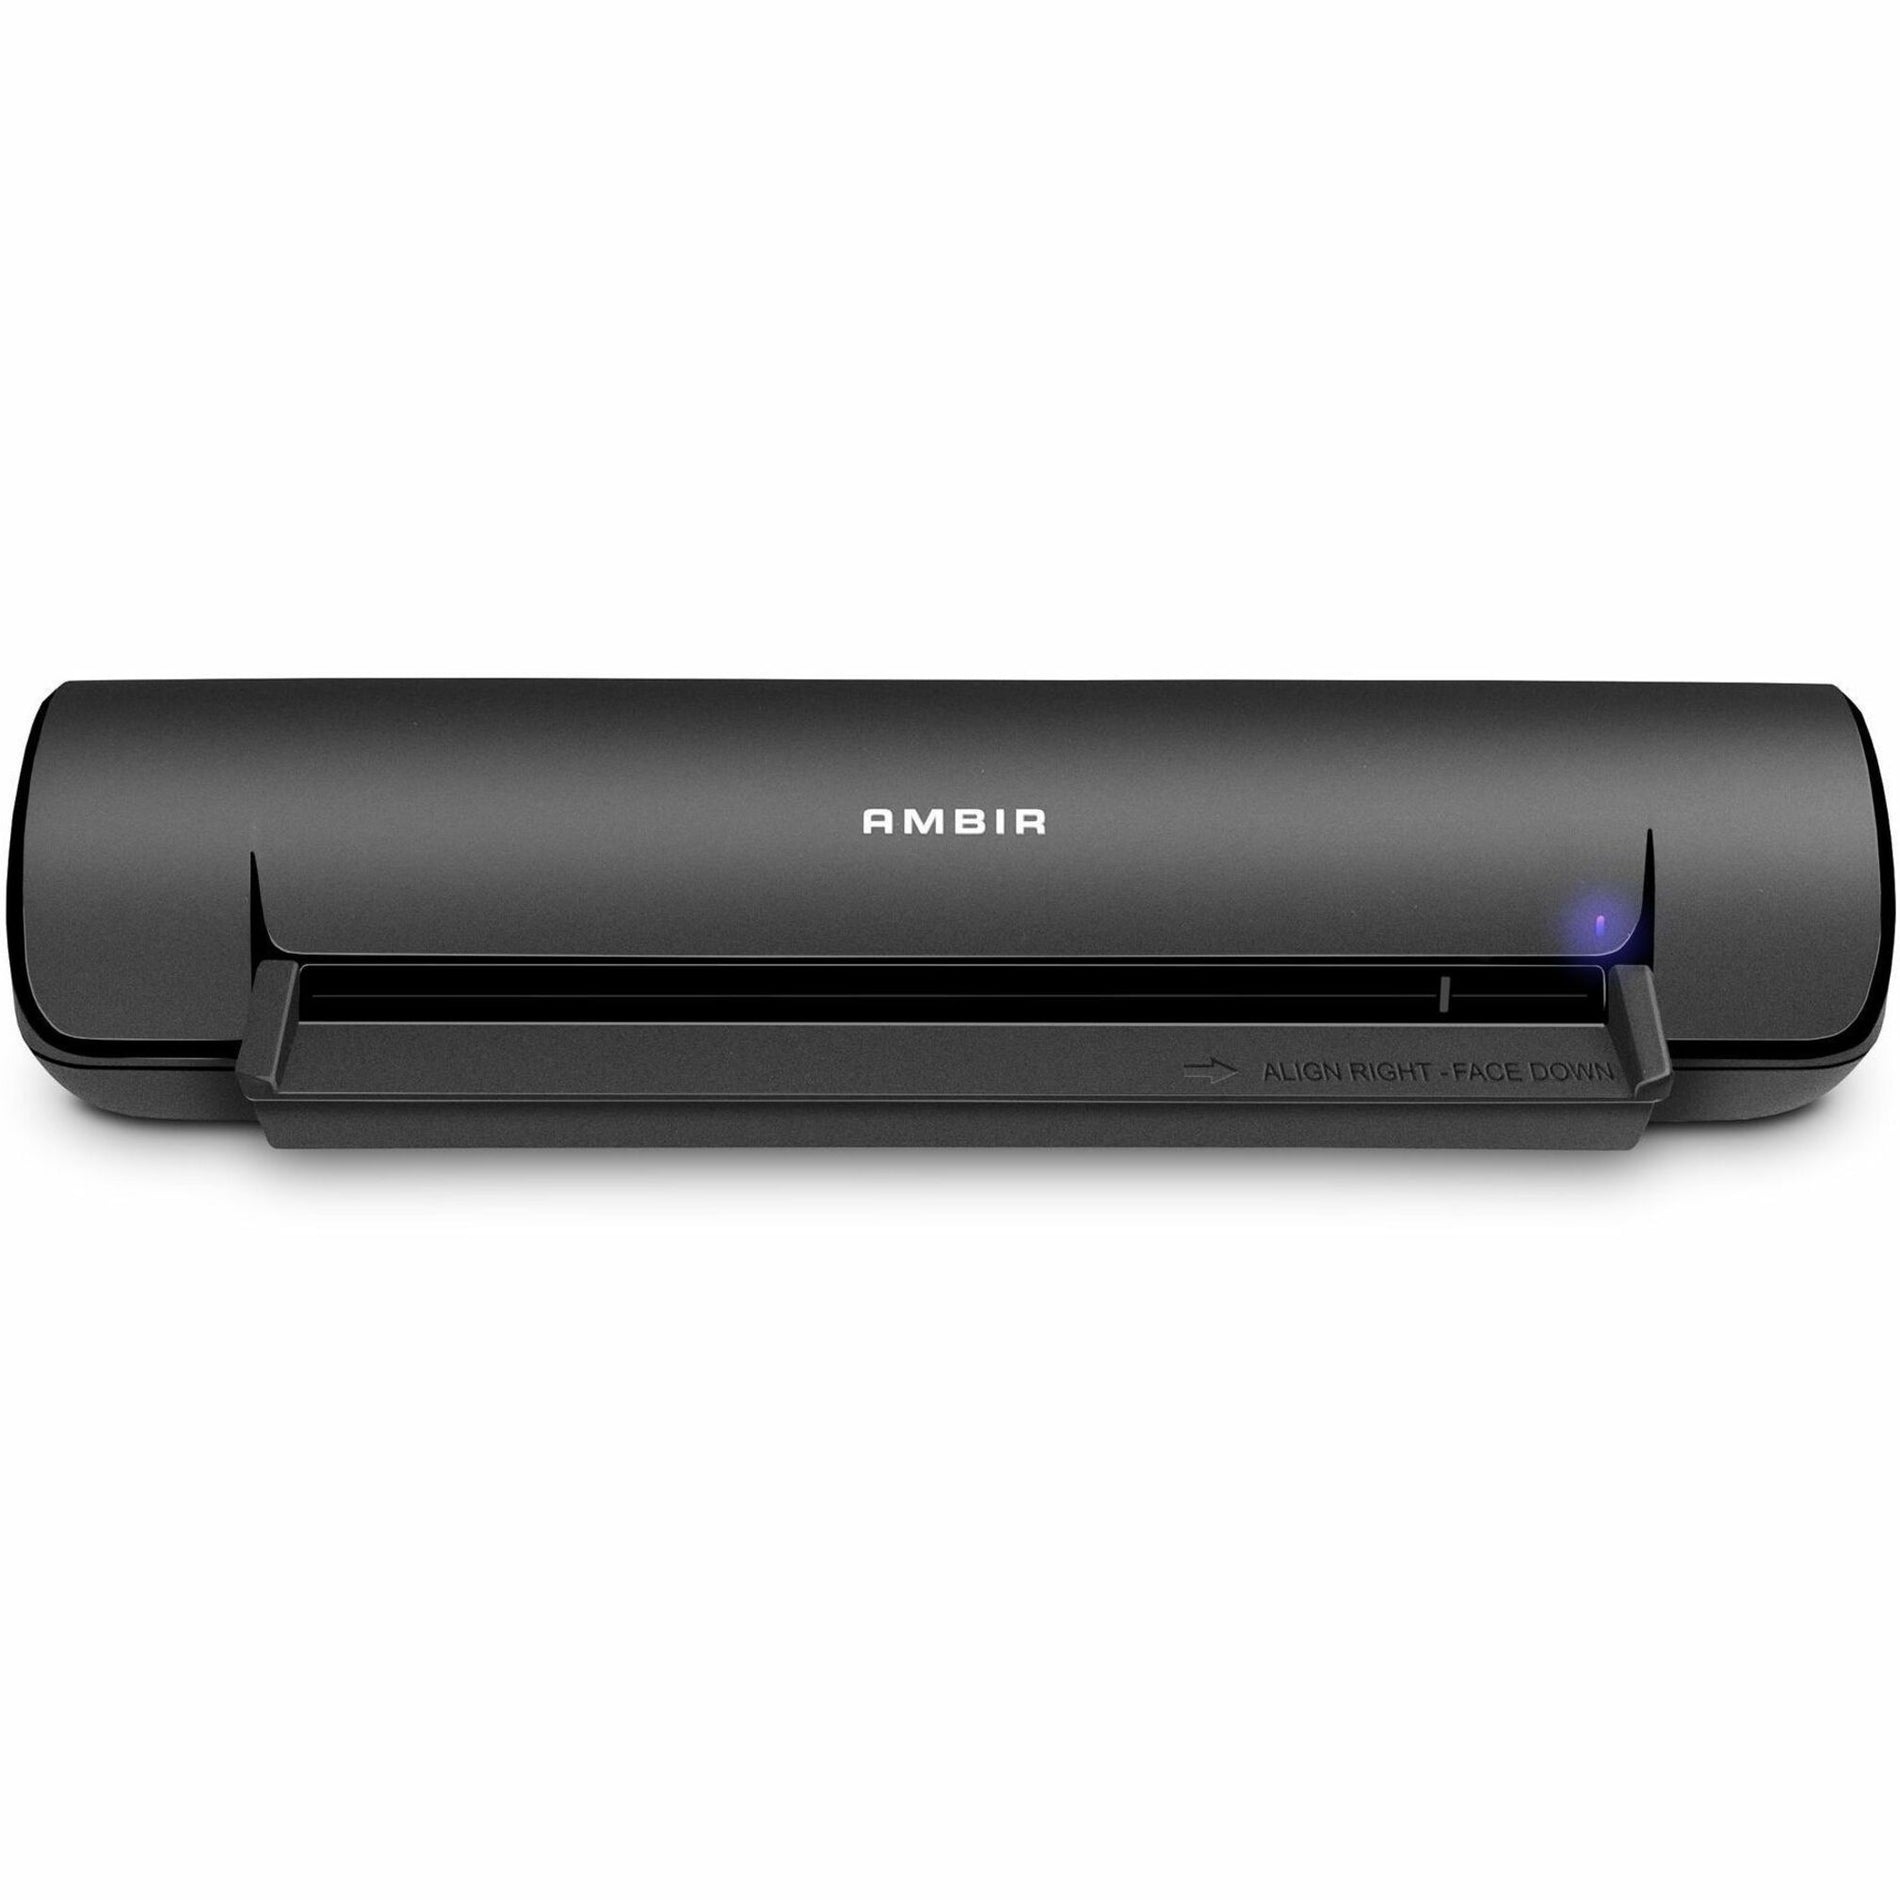 Ambir DS490-BCS ImageScan Pro 490i Duplex Document Scanner with AmbirScan Business Card, USB, 2 Year Warranty